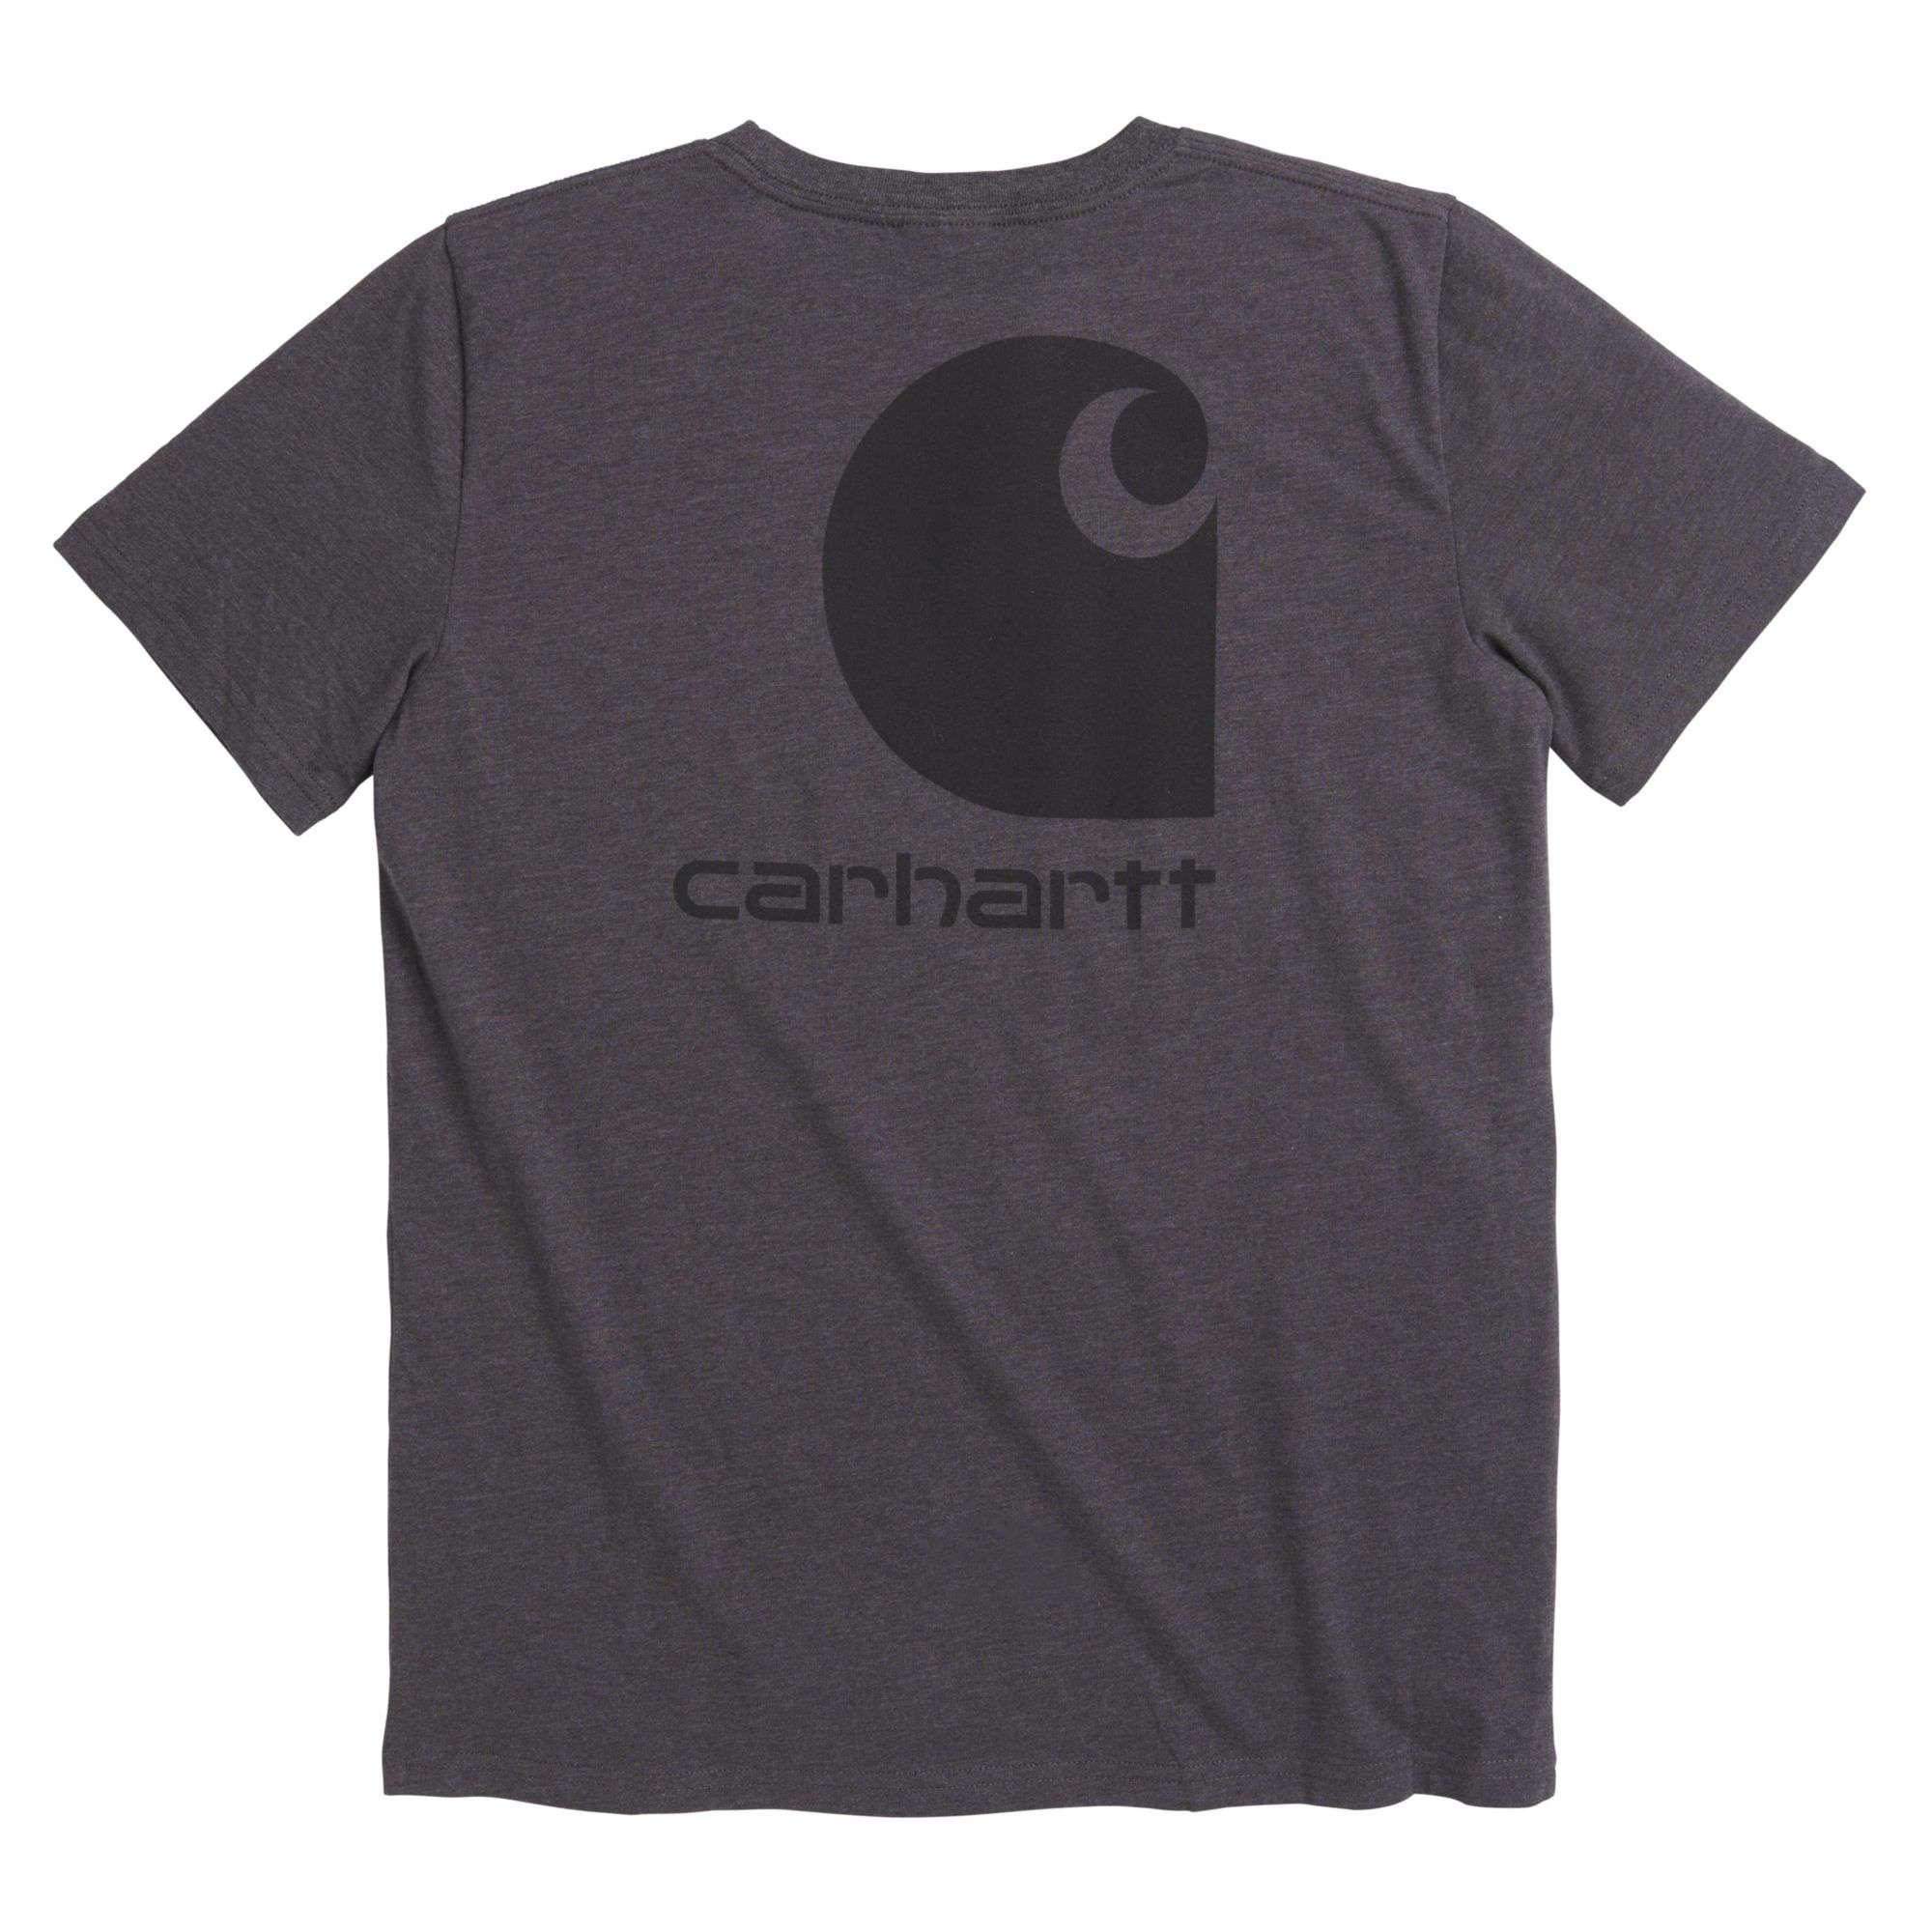 Boys' Shirts for All Seasons, Activities, & More| Carhartt